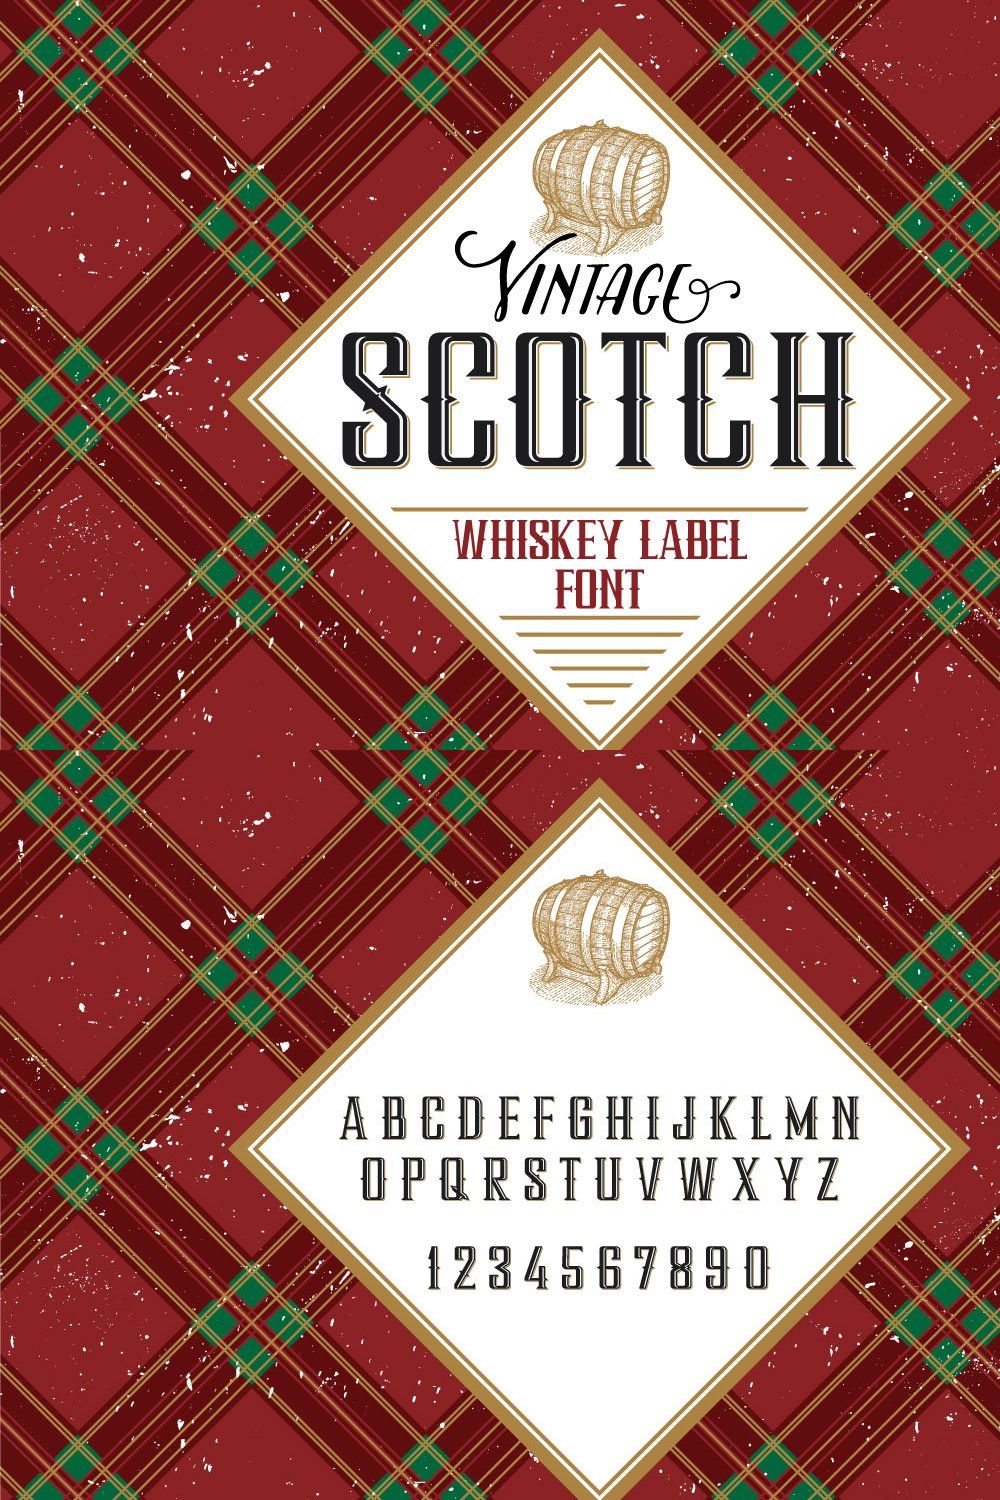 Scotch whiskey label font pinterest preview image.